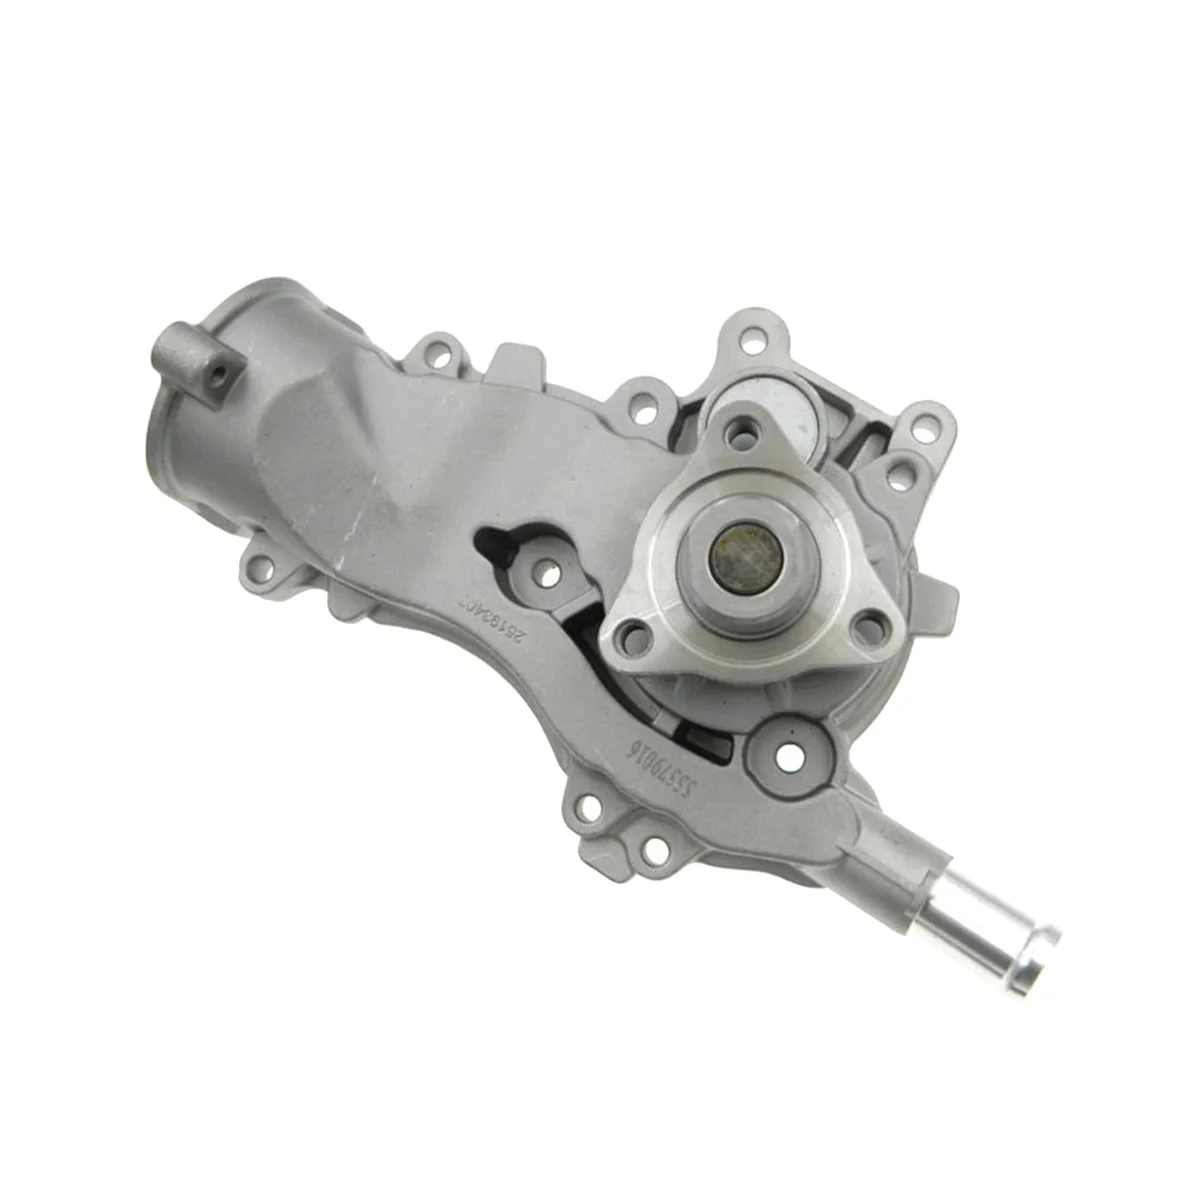 

55579016 5192709 , AW6662 Engine Water Pump for Buick Encore Chevrolet Sonic Cruze 2011 2012 2013 2014 I4 1.4L